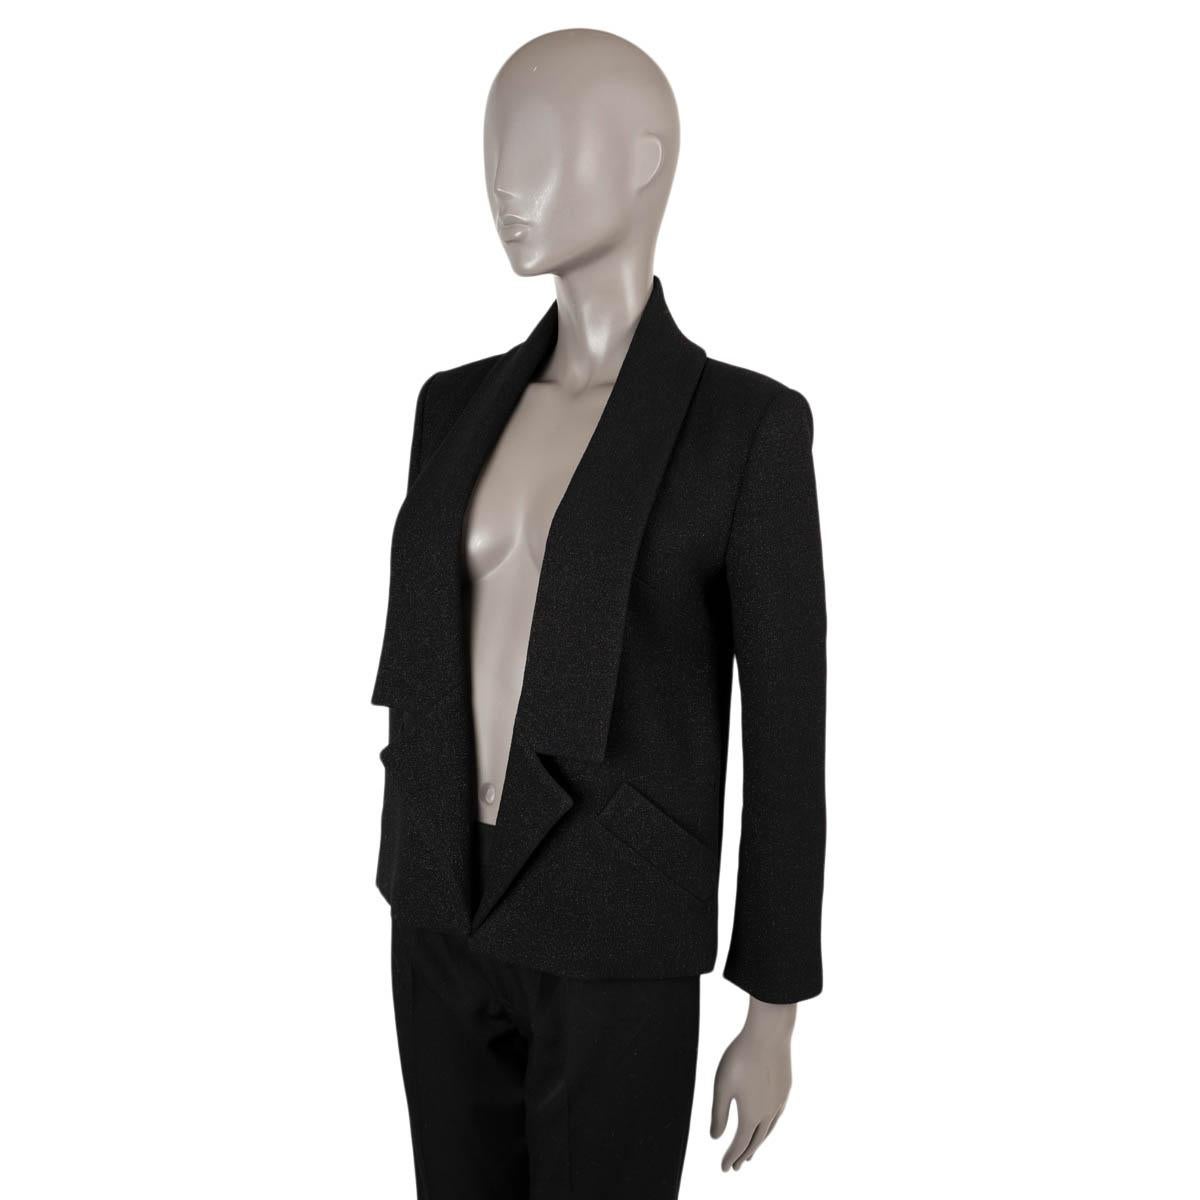 100% authentic Chanel shawl collar open lurex jacket in black wool (97%) and polyamide (3%). The design features three buttons on each cuff and two slit front pockets. Lined in black silk (100%). Has been worn and is in excellent condition. 

2014